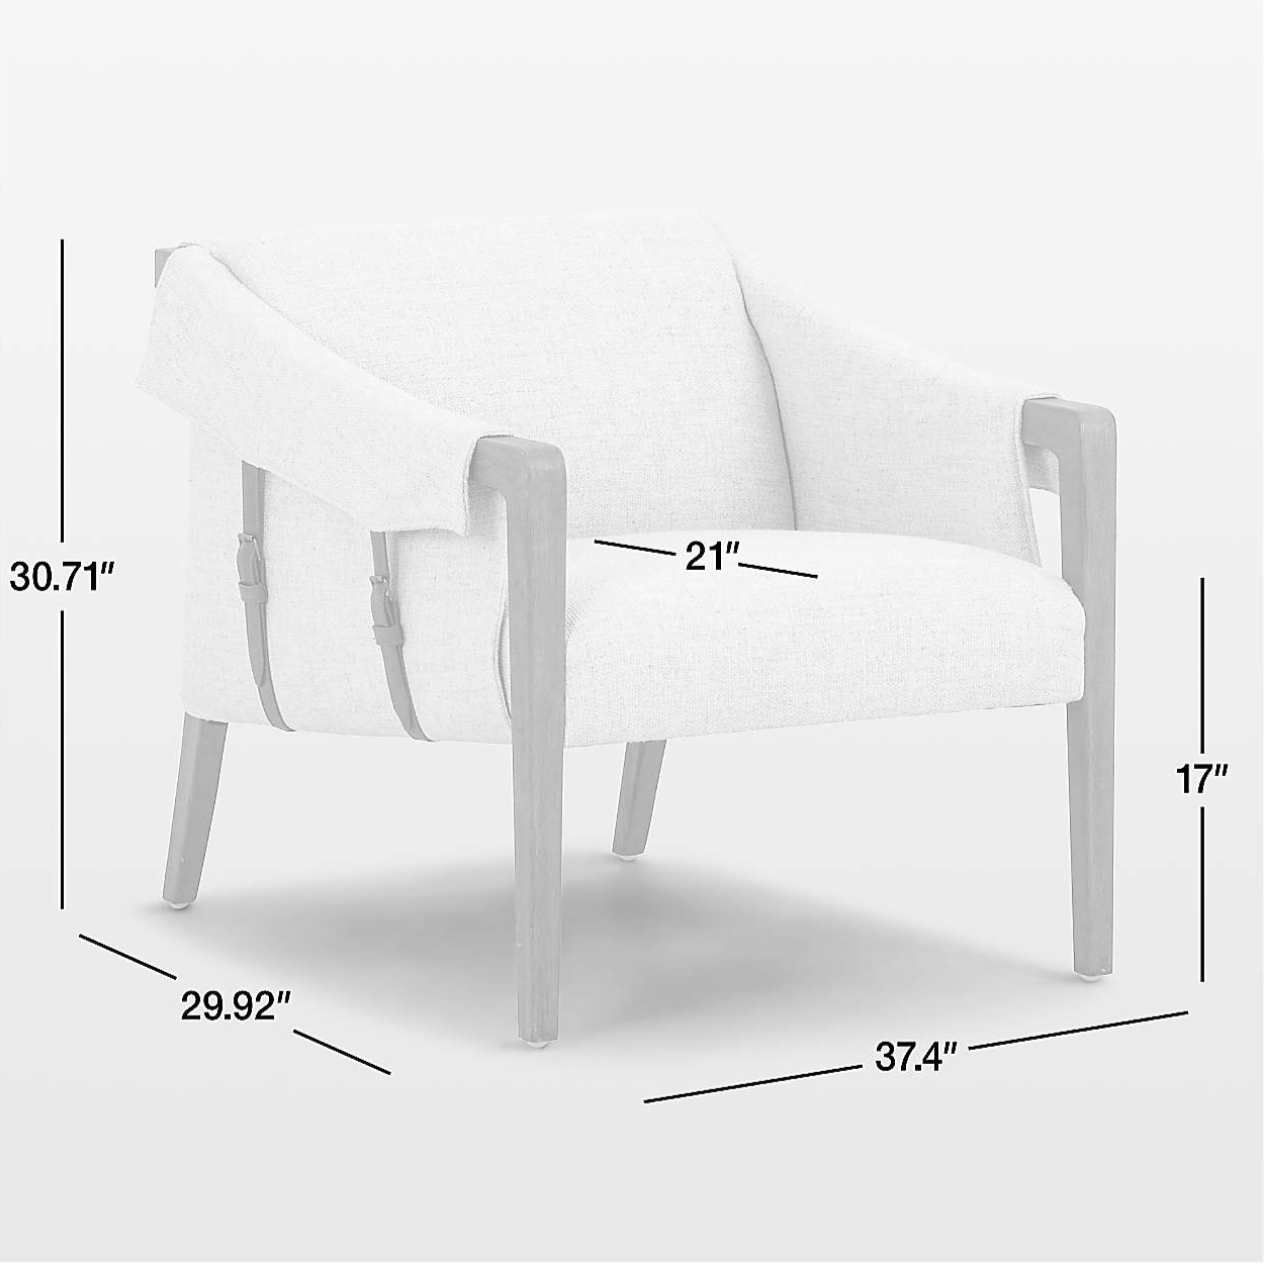 OFF WHITE LINEN AND WOOD ARM CHAIR WITH LEATHER BUCKLE SIDE ACCENTS